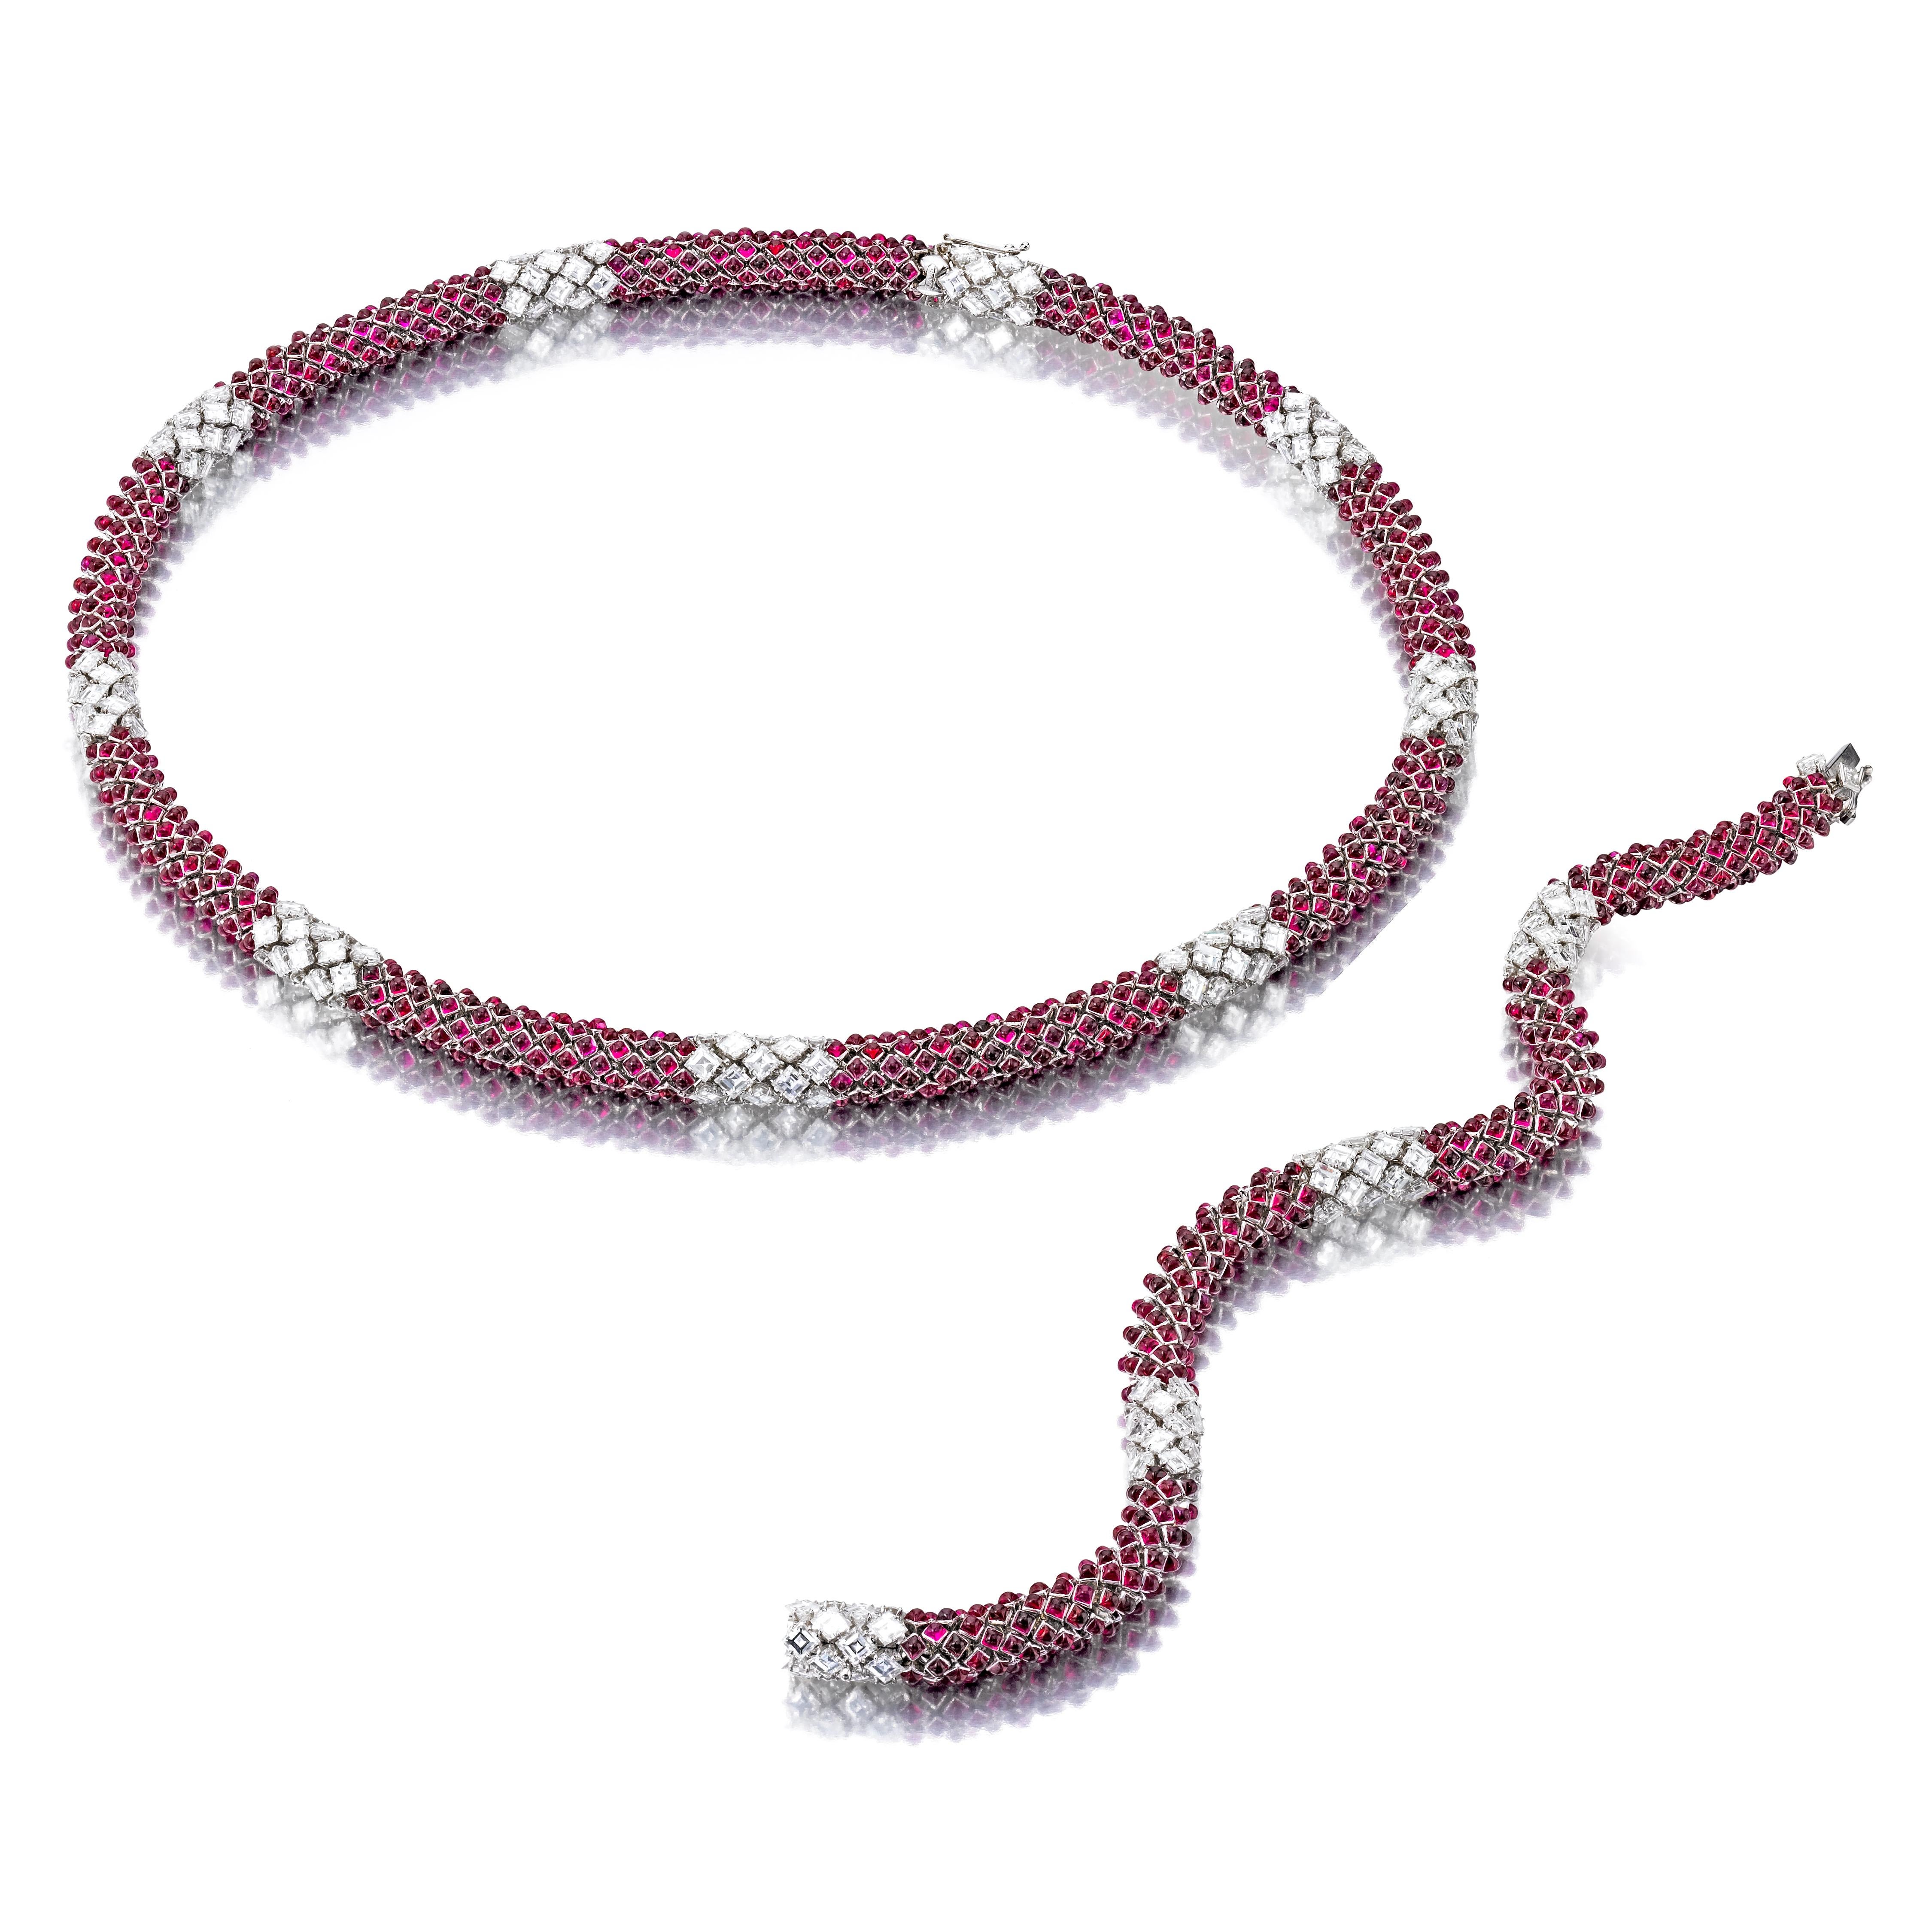 A necklace and bracelet of flexible cylindrical design alternating collet-set ruby and prong-set diamond segments; mounted in platinum

Necklace
• Square diamonds, total weighing 20.70 carats
• Square rubies, total weighing 40 carats
• Measurements: